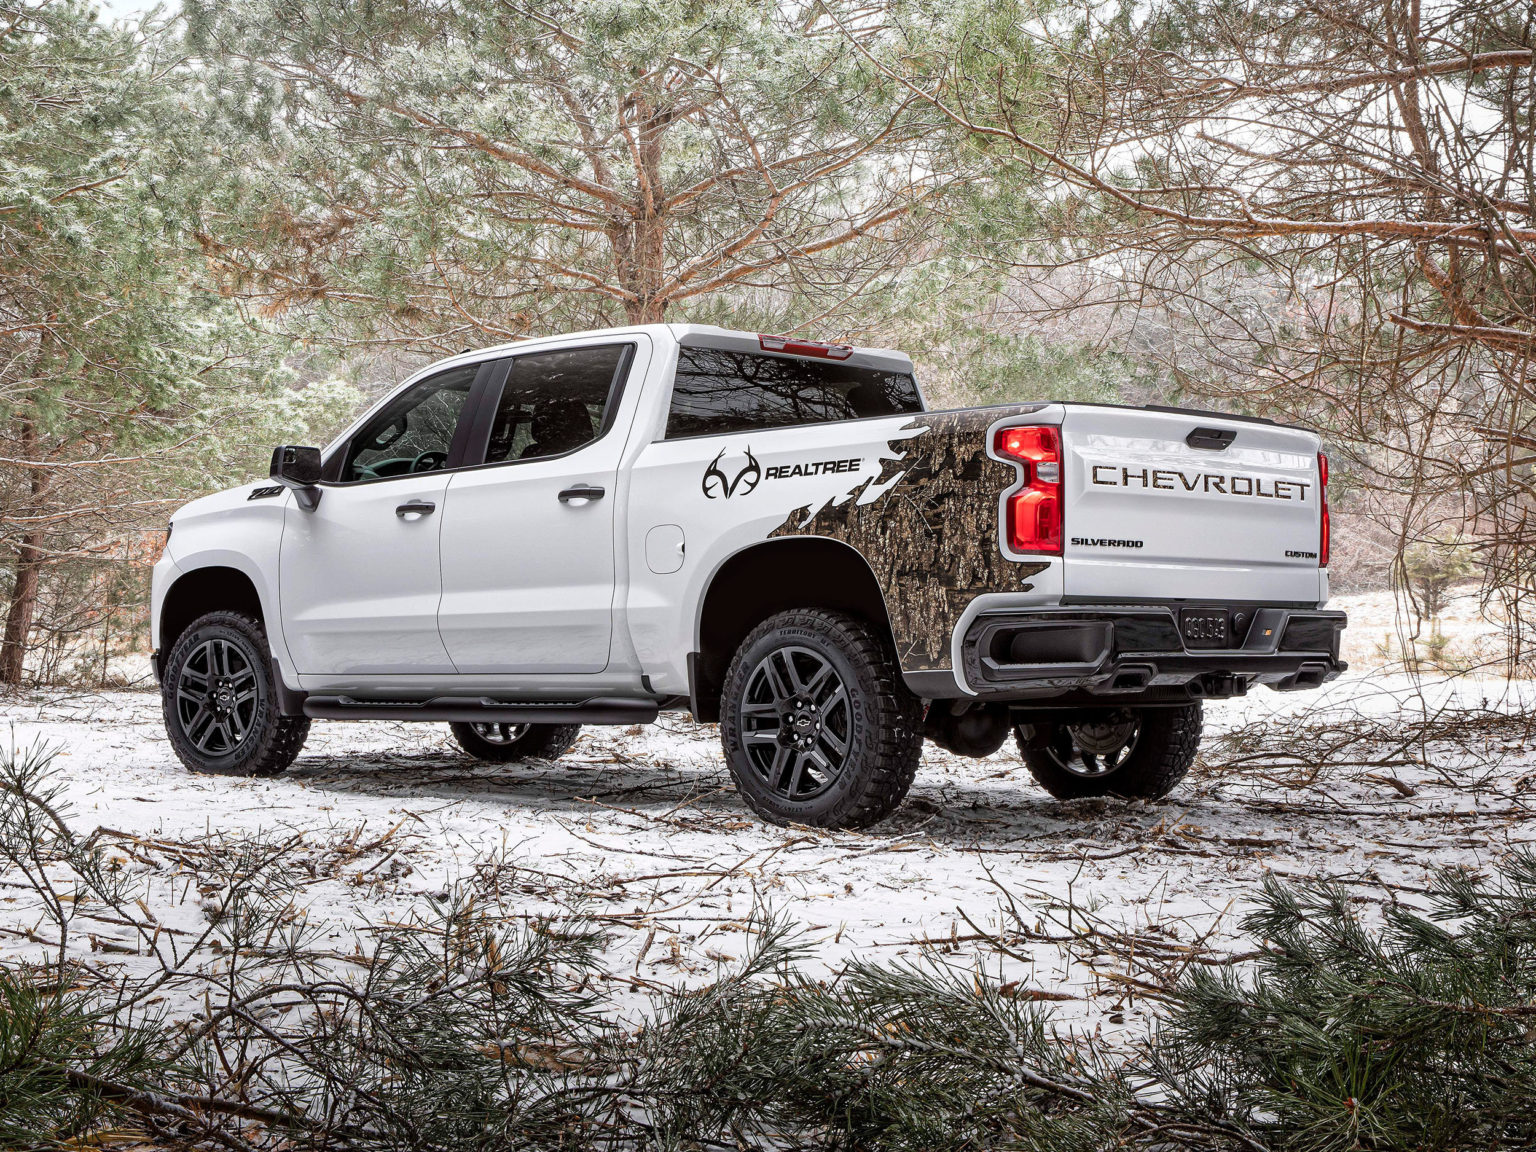 Chevy is once again selling a Silverado 1500 Realtree Edition.